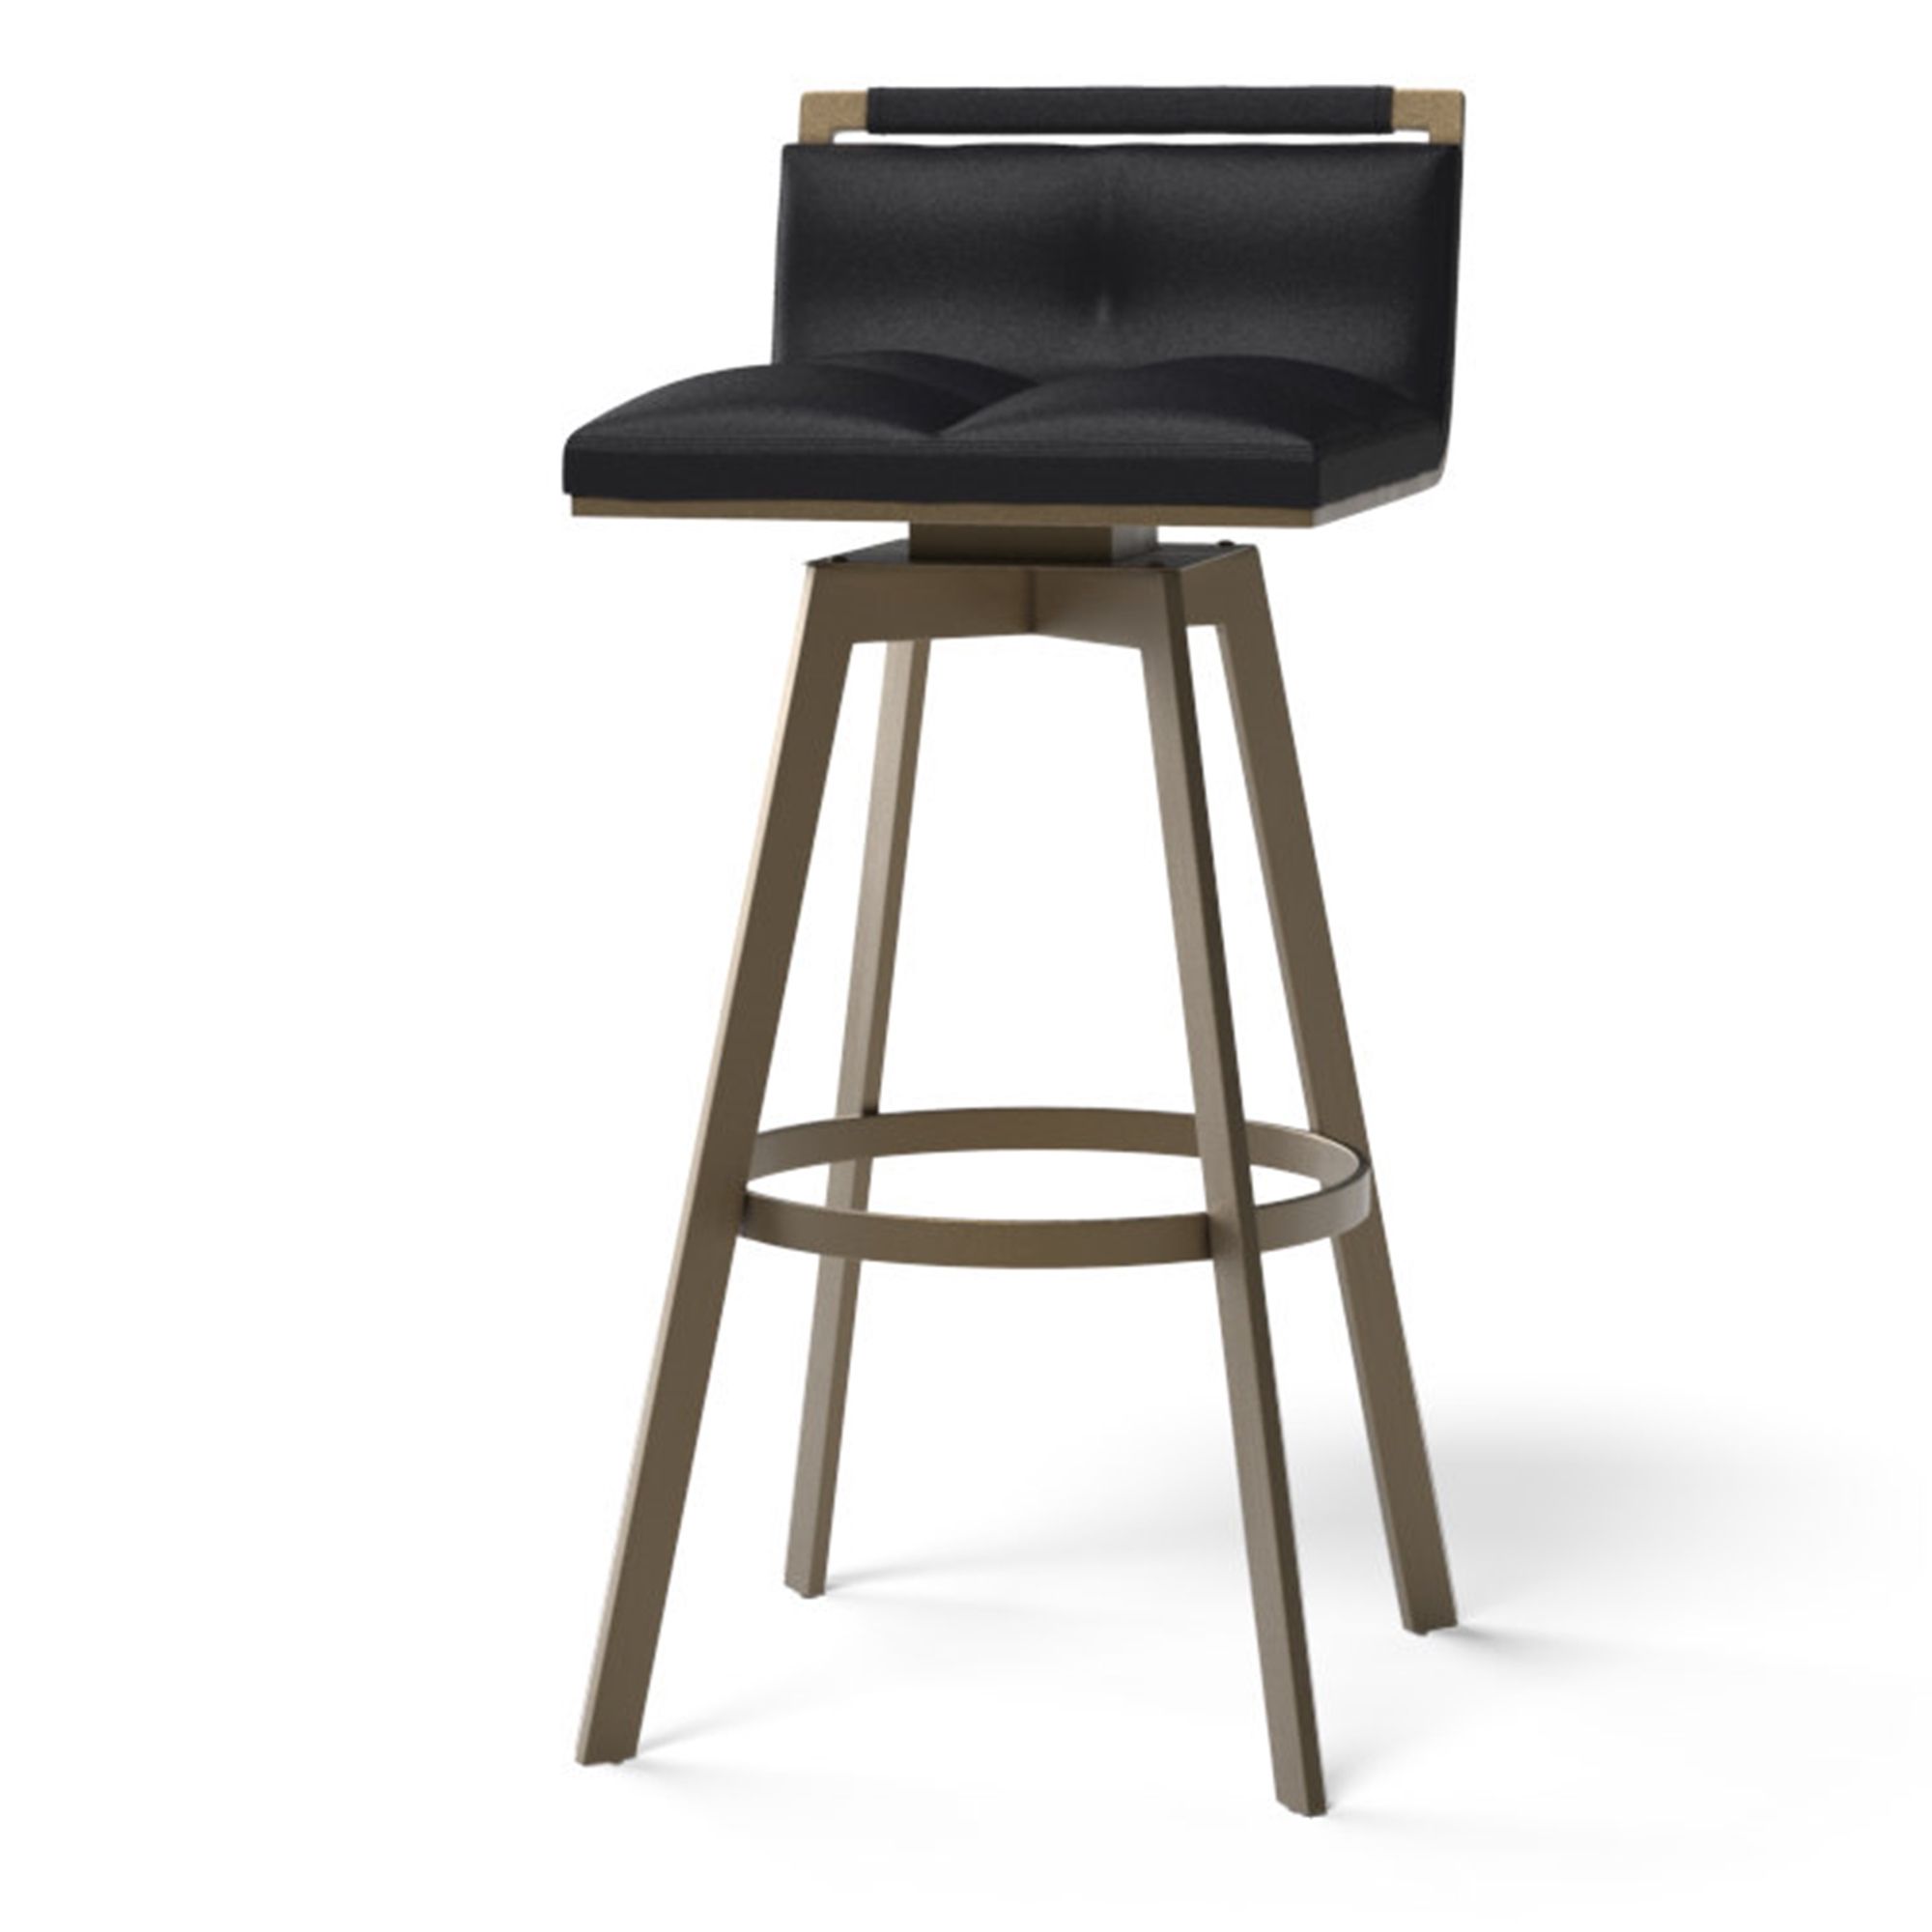 Restaurant Chairs, Stools & Booths :: Black Leather Swivel Counter/bar For Preferred White Antique Brass Stools (View 5 of 10)